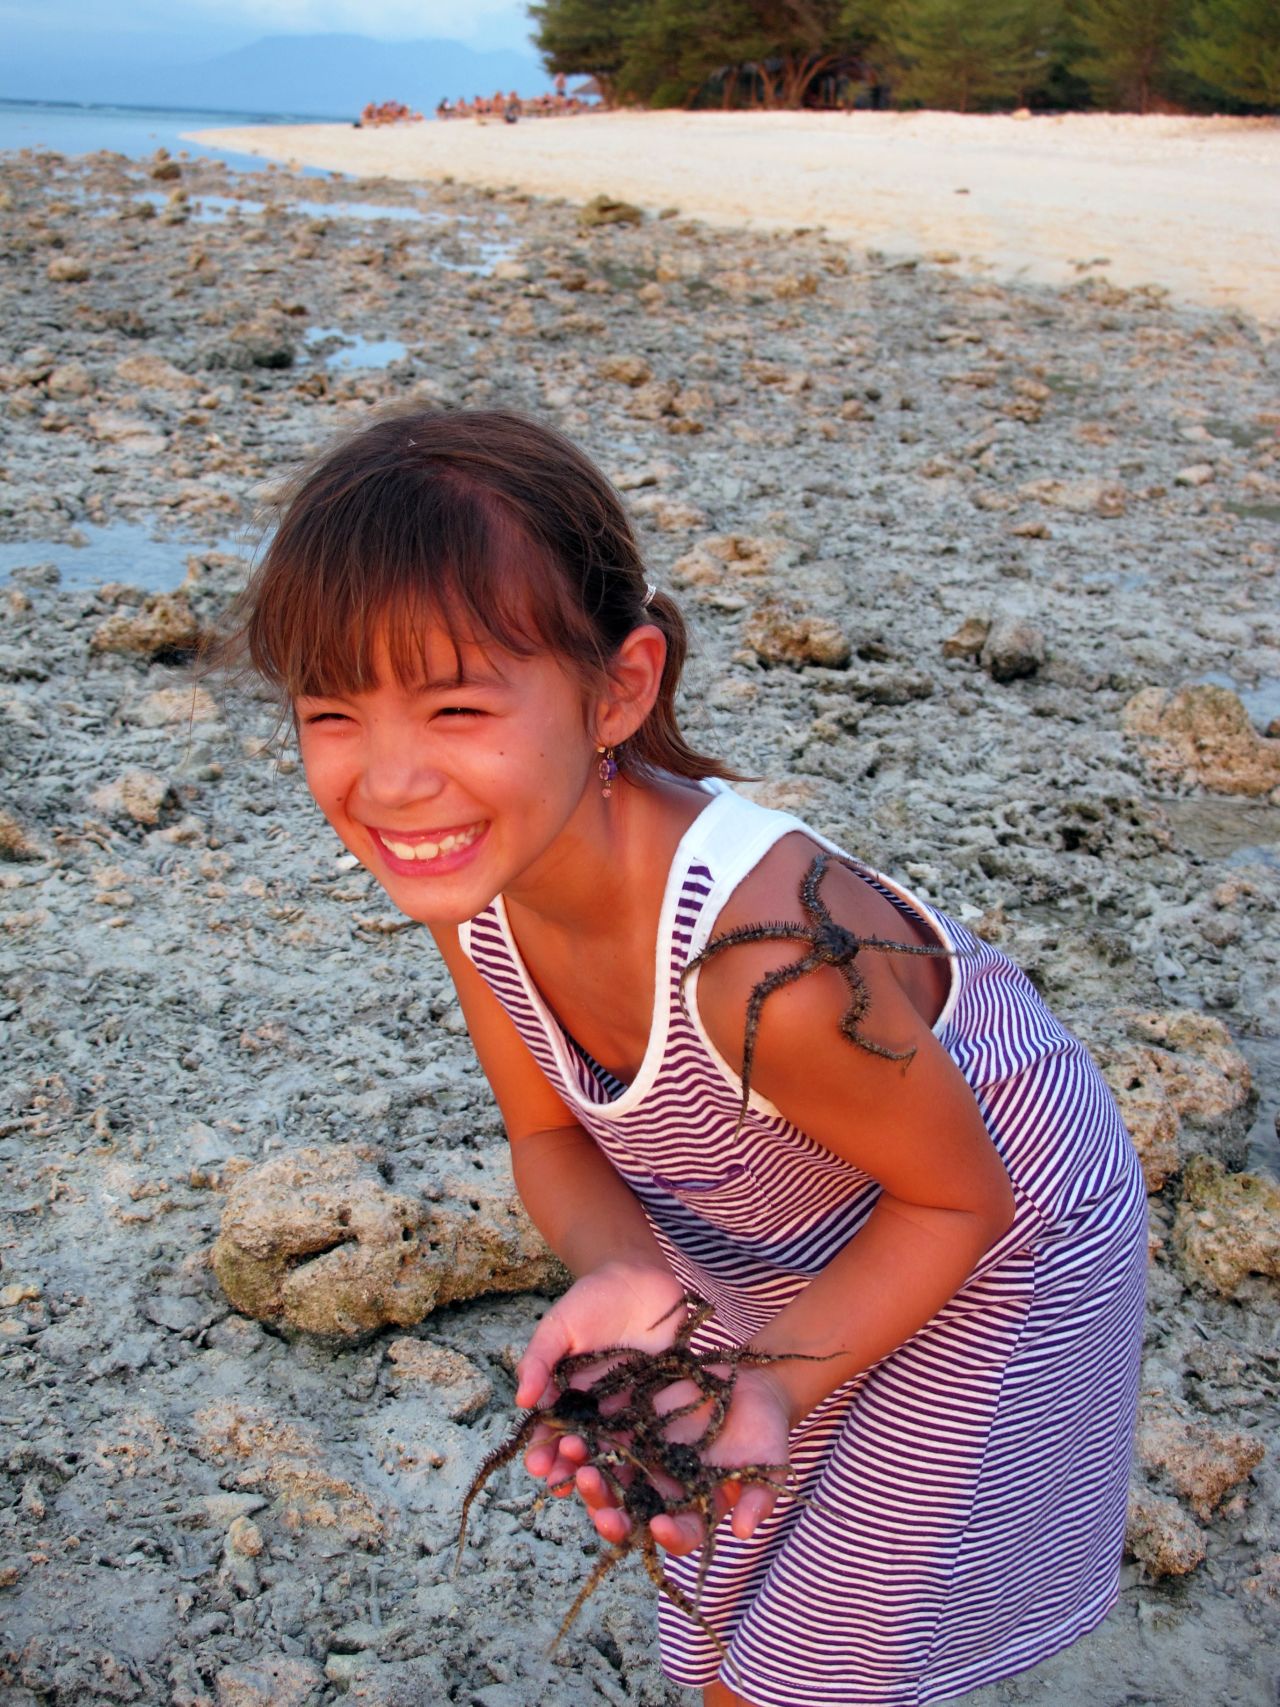 "The starfish were literally everywhere on the beach hiding underneath the rocks and corrals that were exposed at low tide," says <a href="http://ireport.cnn.com/docs/DOC-1038853">Joyce Wilmot</a>, who captured this photo of her daughter.